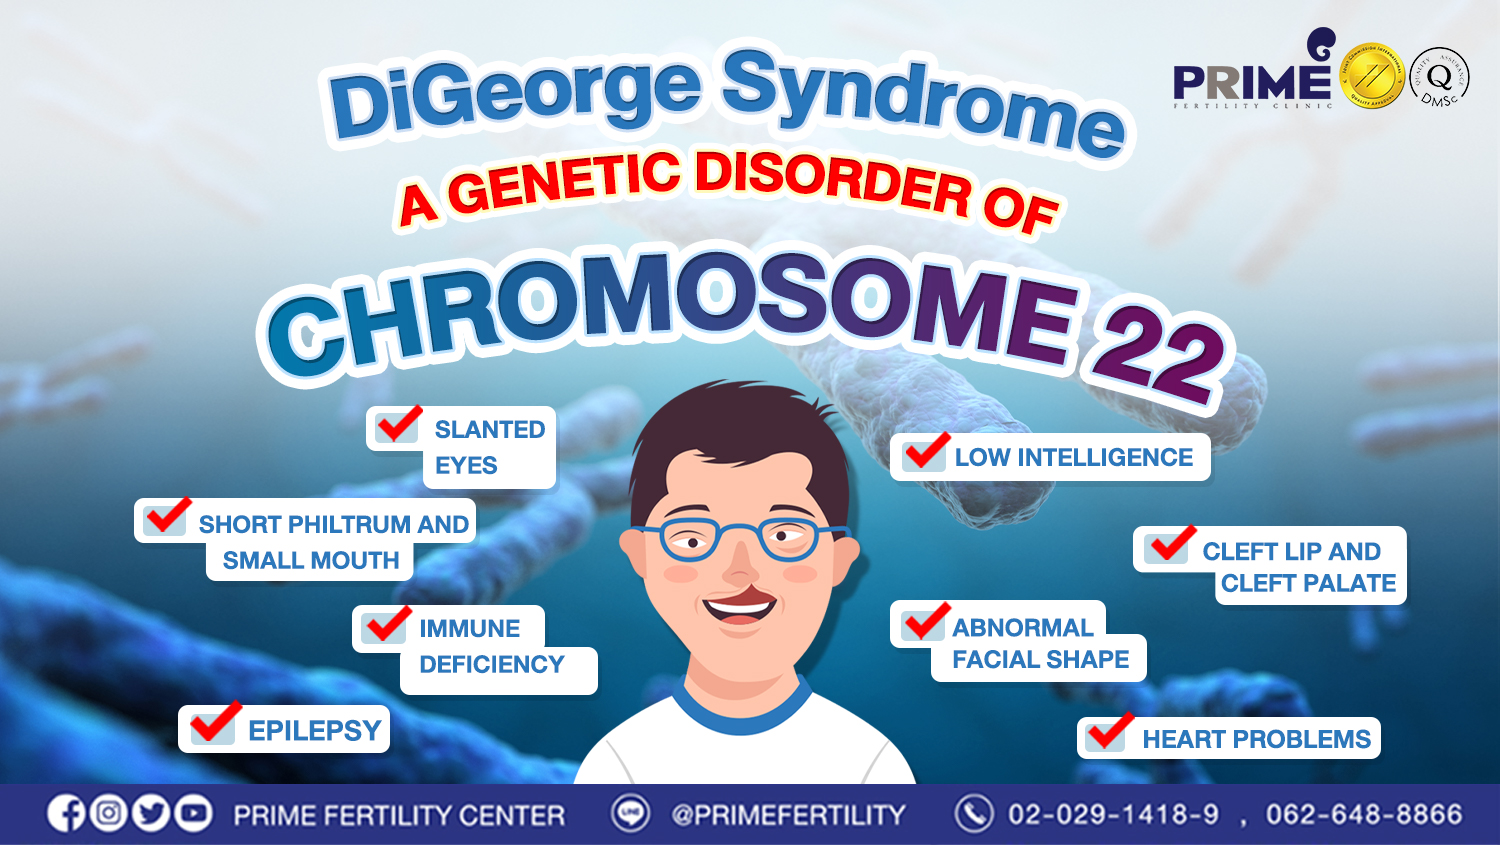 DiGeorge syndrome, a genetic disorder of chromosome 22